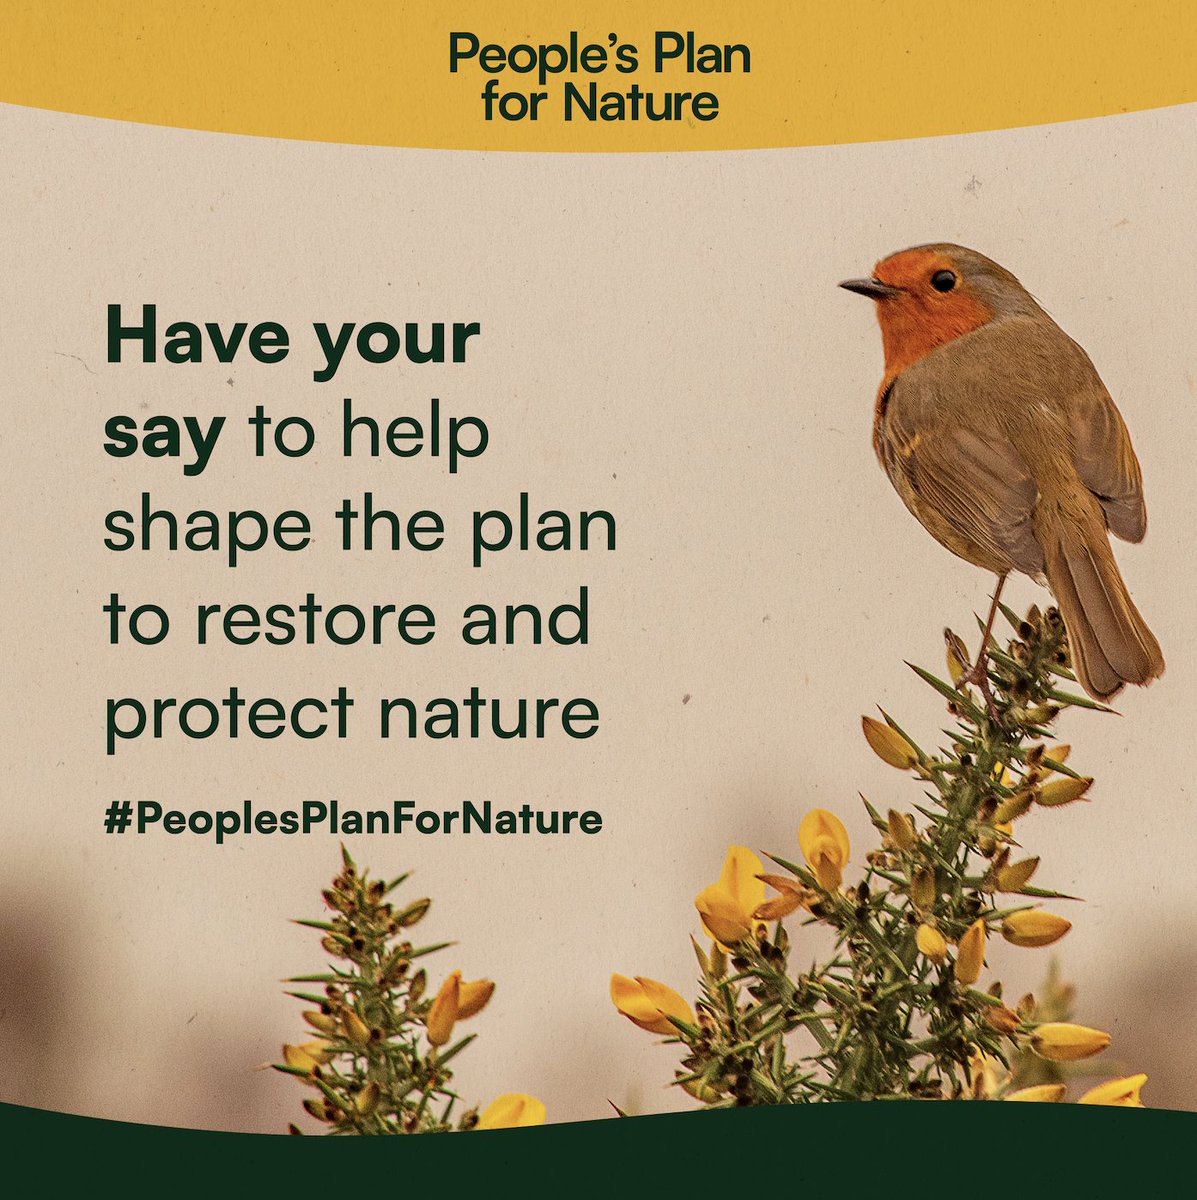 We are powering the #PeoplesPlanForNature - the biggest conversation about the future of nature in the UK. The nature crisis affects everyone, so everyone should have a say on how to address it. Click here to have yours 👉 bit.ly/PPfNTw